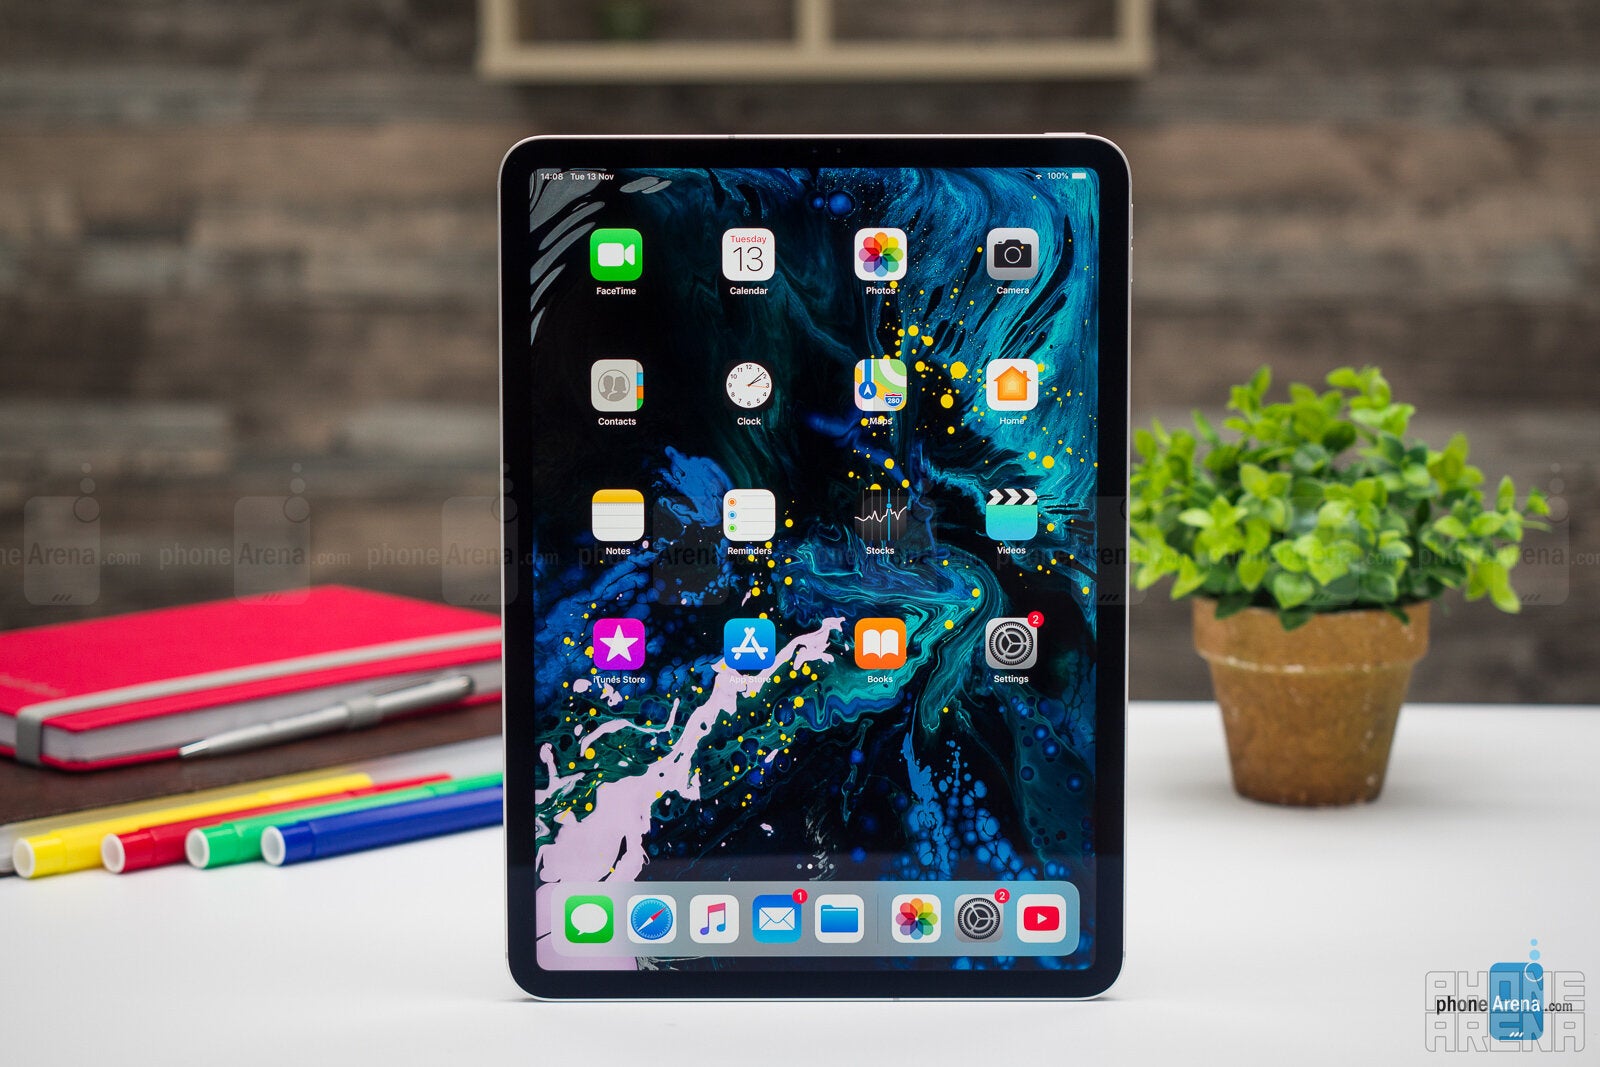 Back to school sales and deals in 2019: Check out these awesome bargains on iPad, MacBook, and more